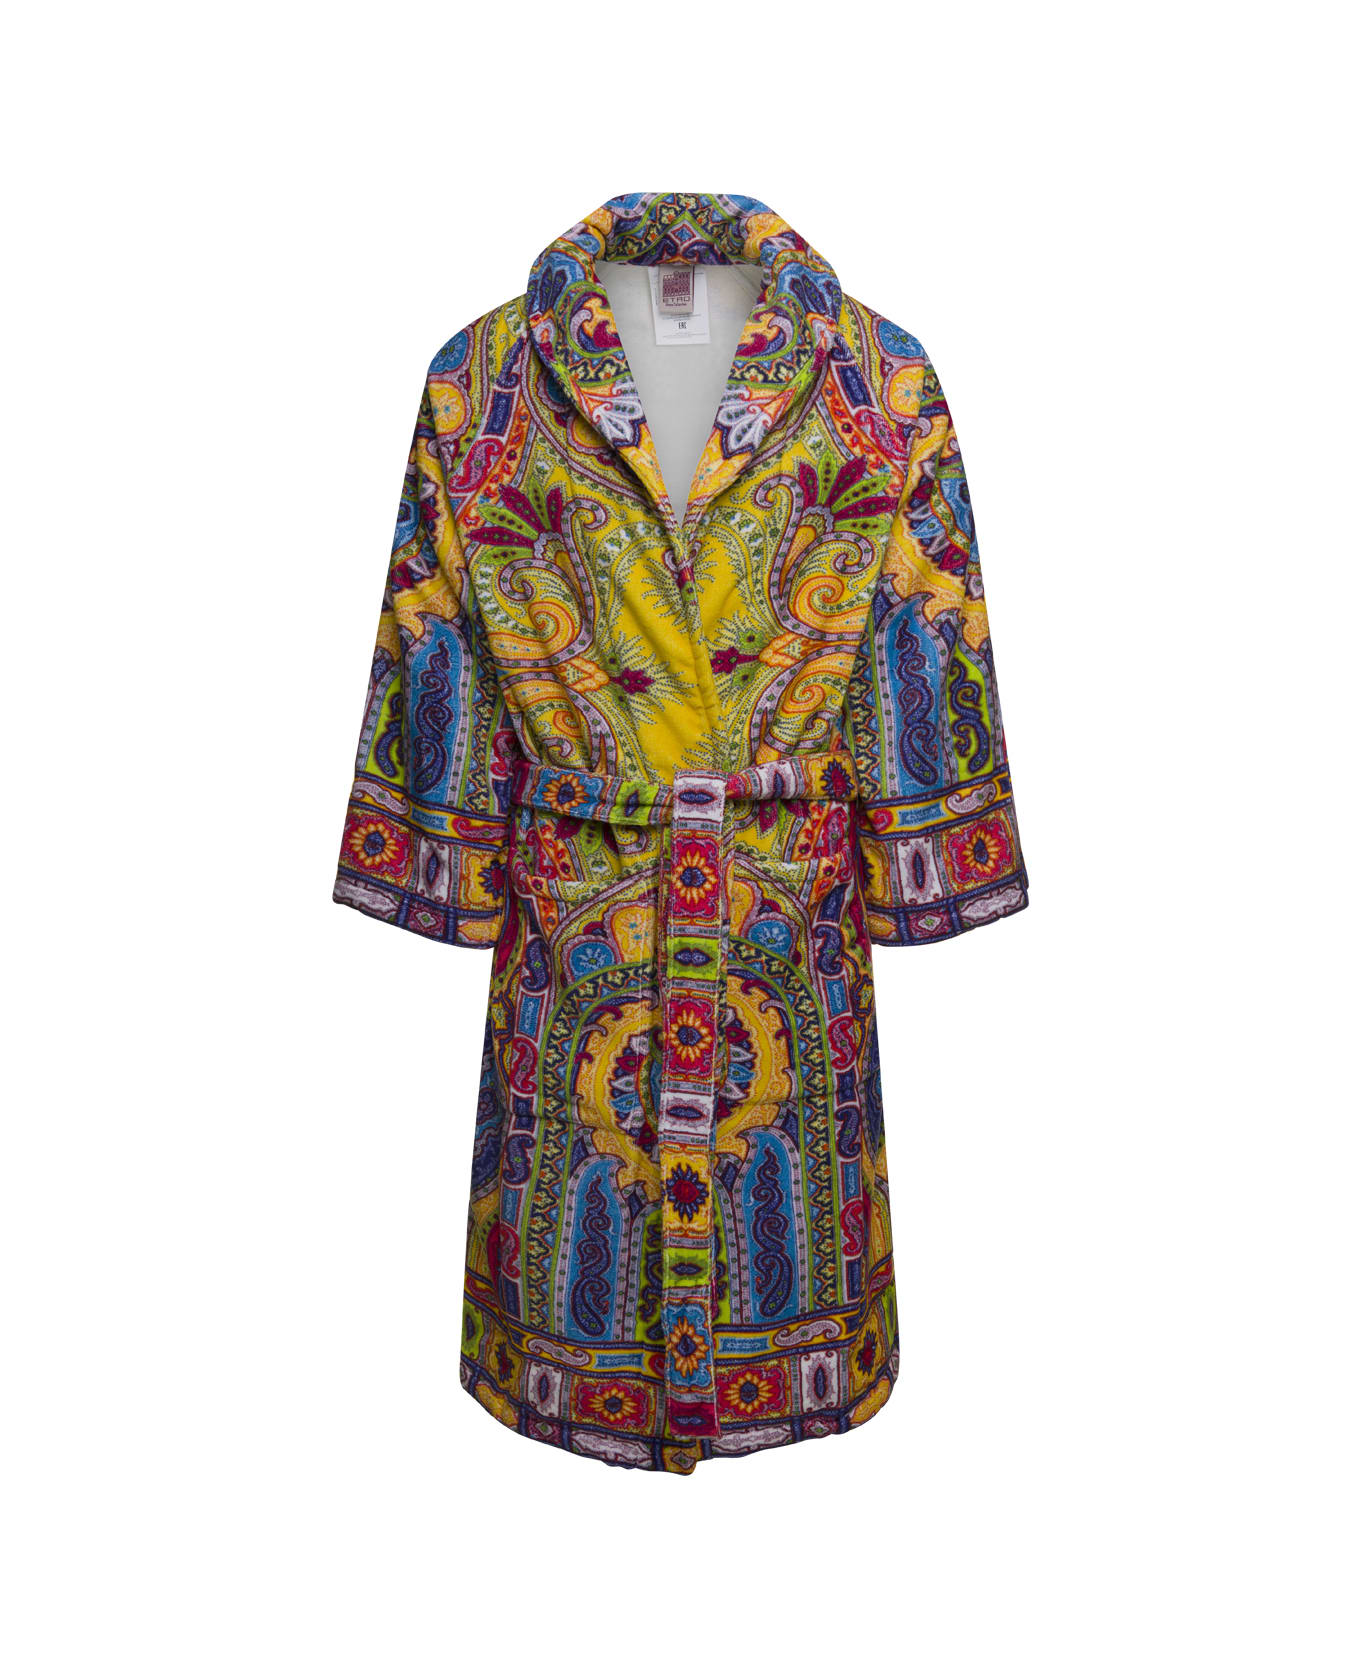 Etro 'new Tradition' Multicolor Bath Robe With Pailsey Motif Home - Yellow